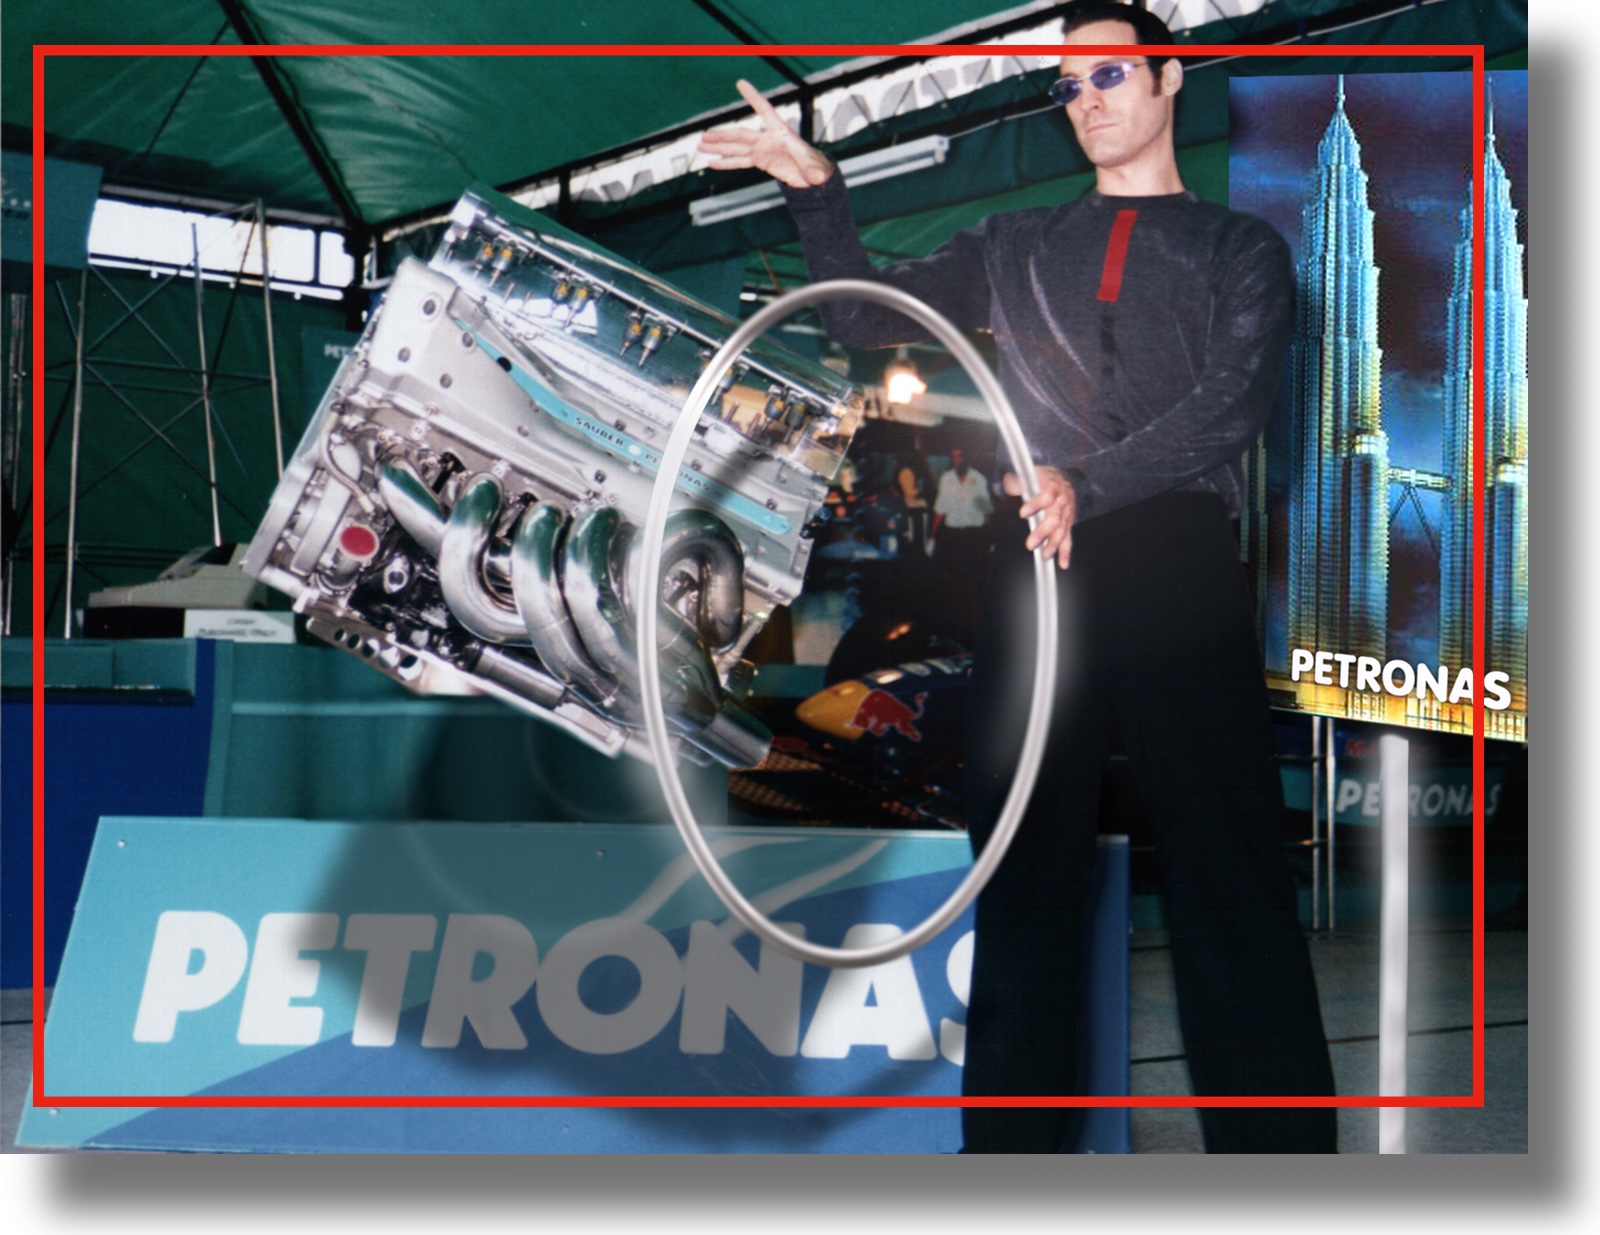 Petronas Clean Comedy Magician Corporate Comedy Magician For Company Parties and Trade Shows in the USA